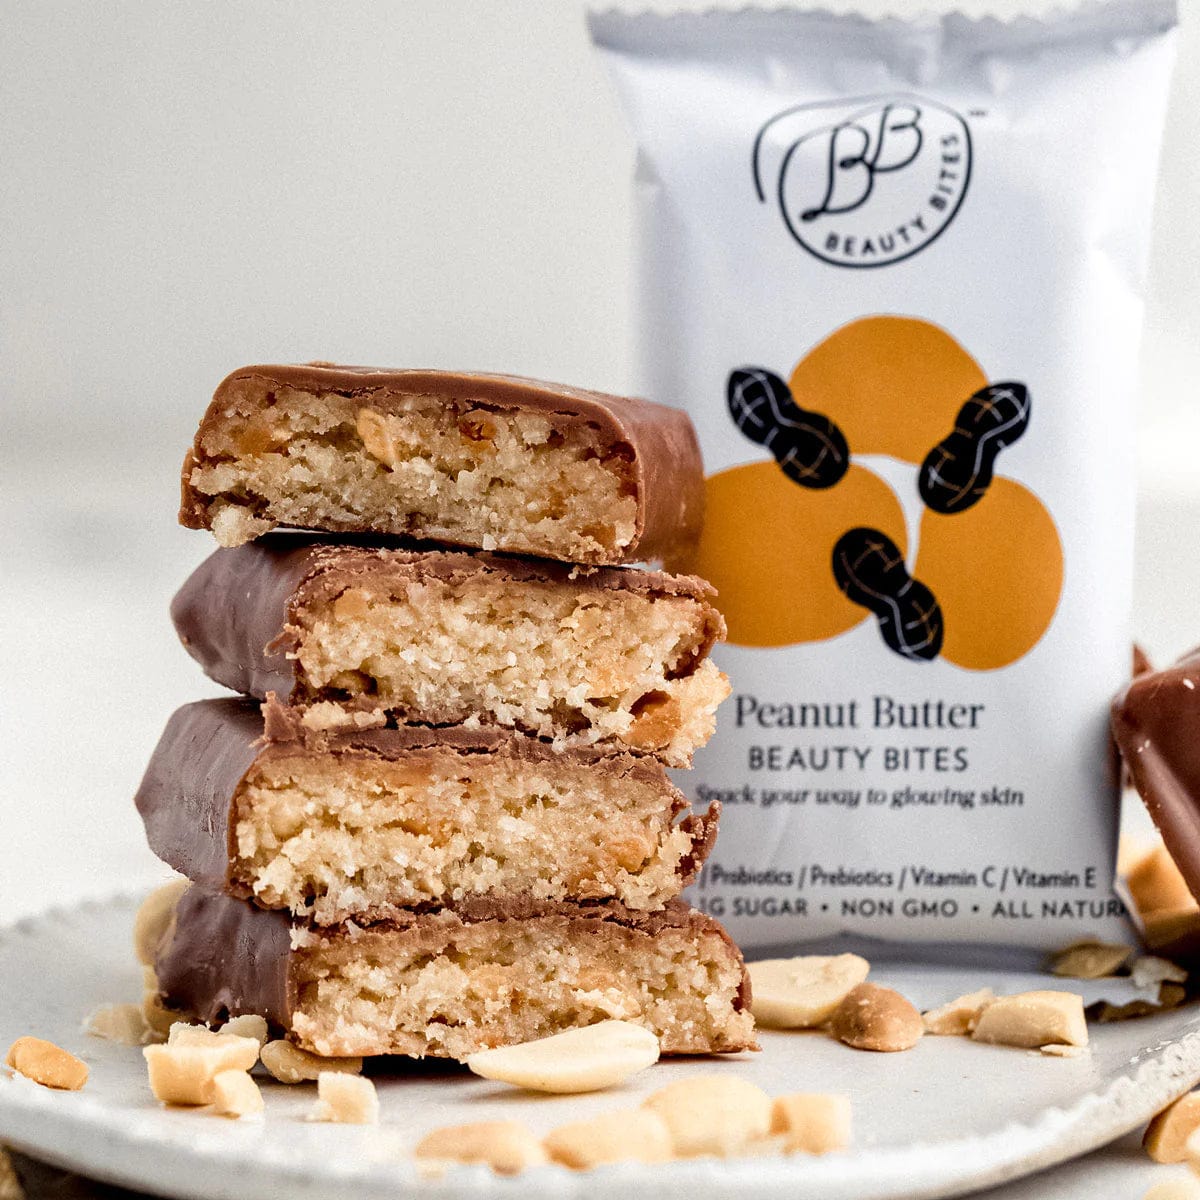 Peanut Butter Beauty Bites by Krumbled Foods